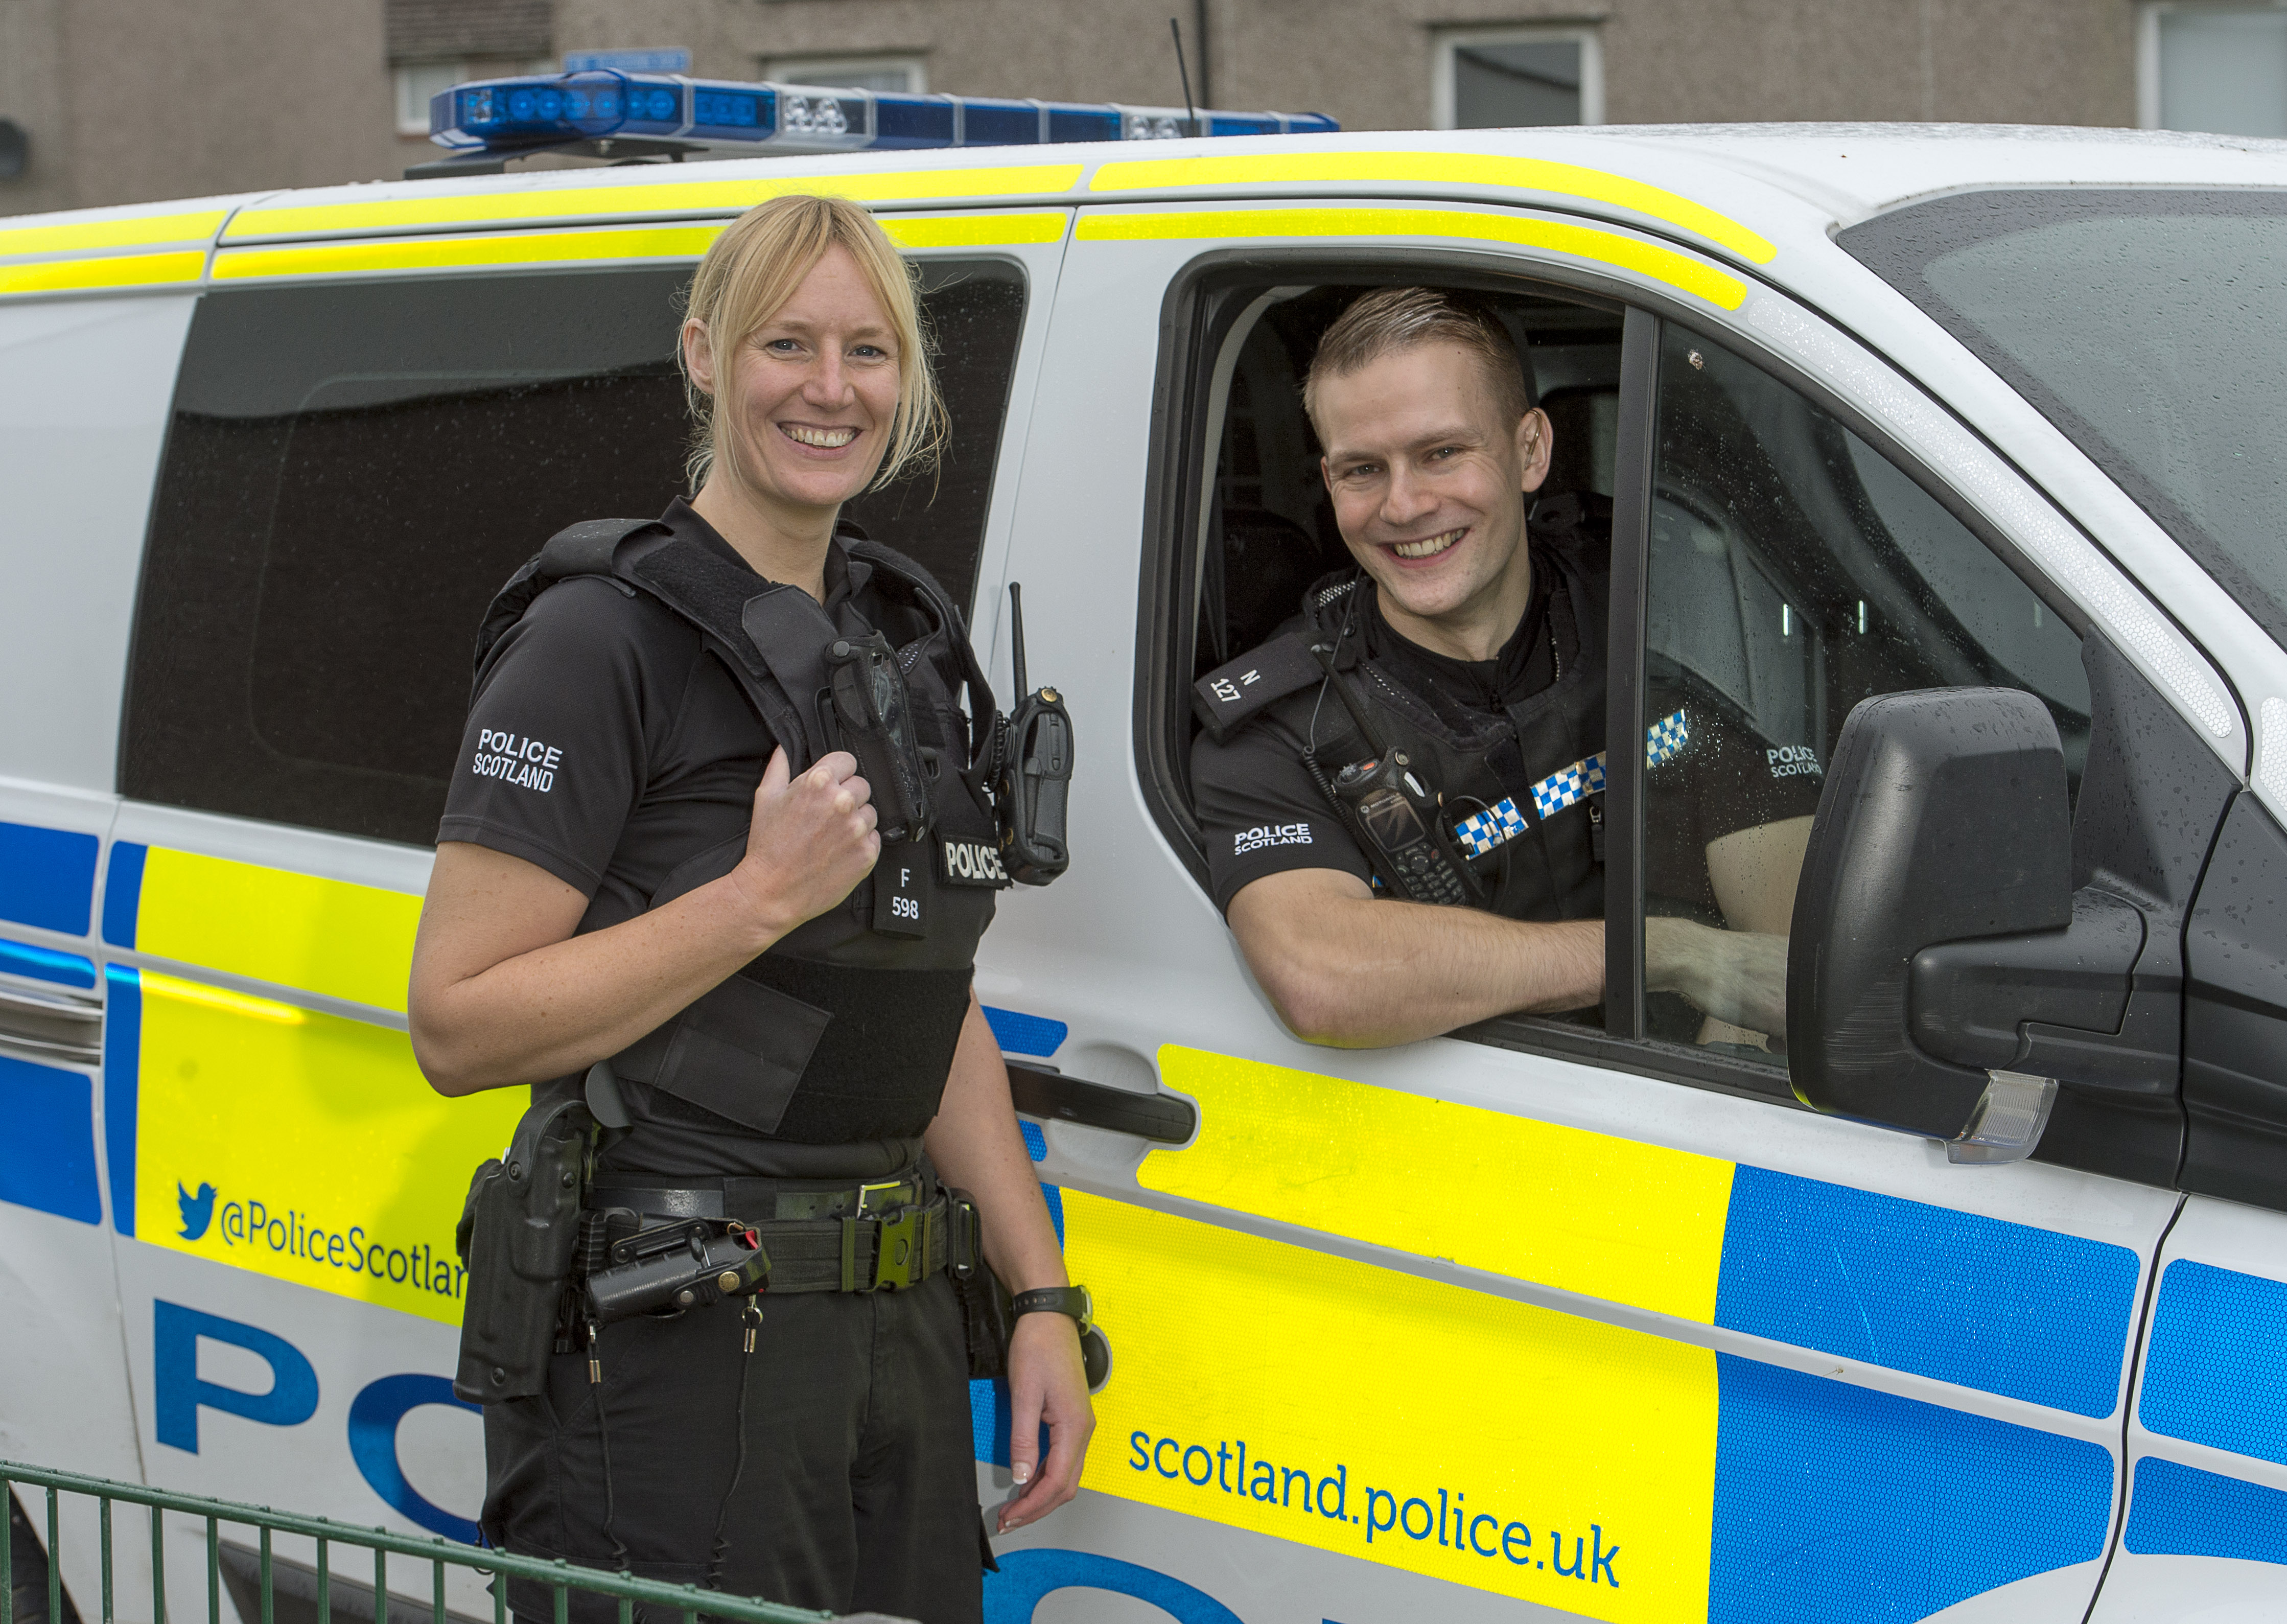 SPF Bravery Awards 
PC Lynn Cameron and PC Craig McFarlane   rescued a woman from a Fire in her Flat in Old Town Road in Inverness

Pic Trevor Martin